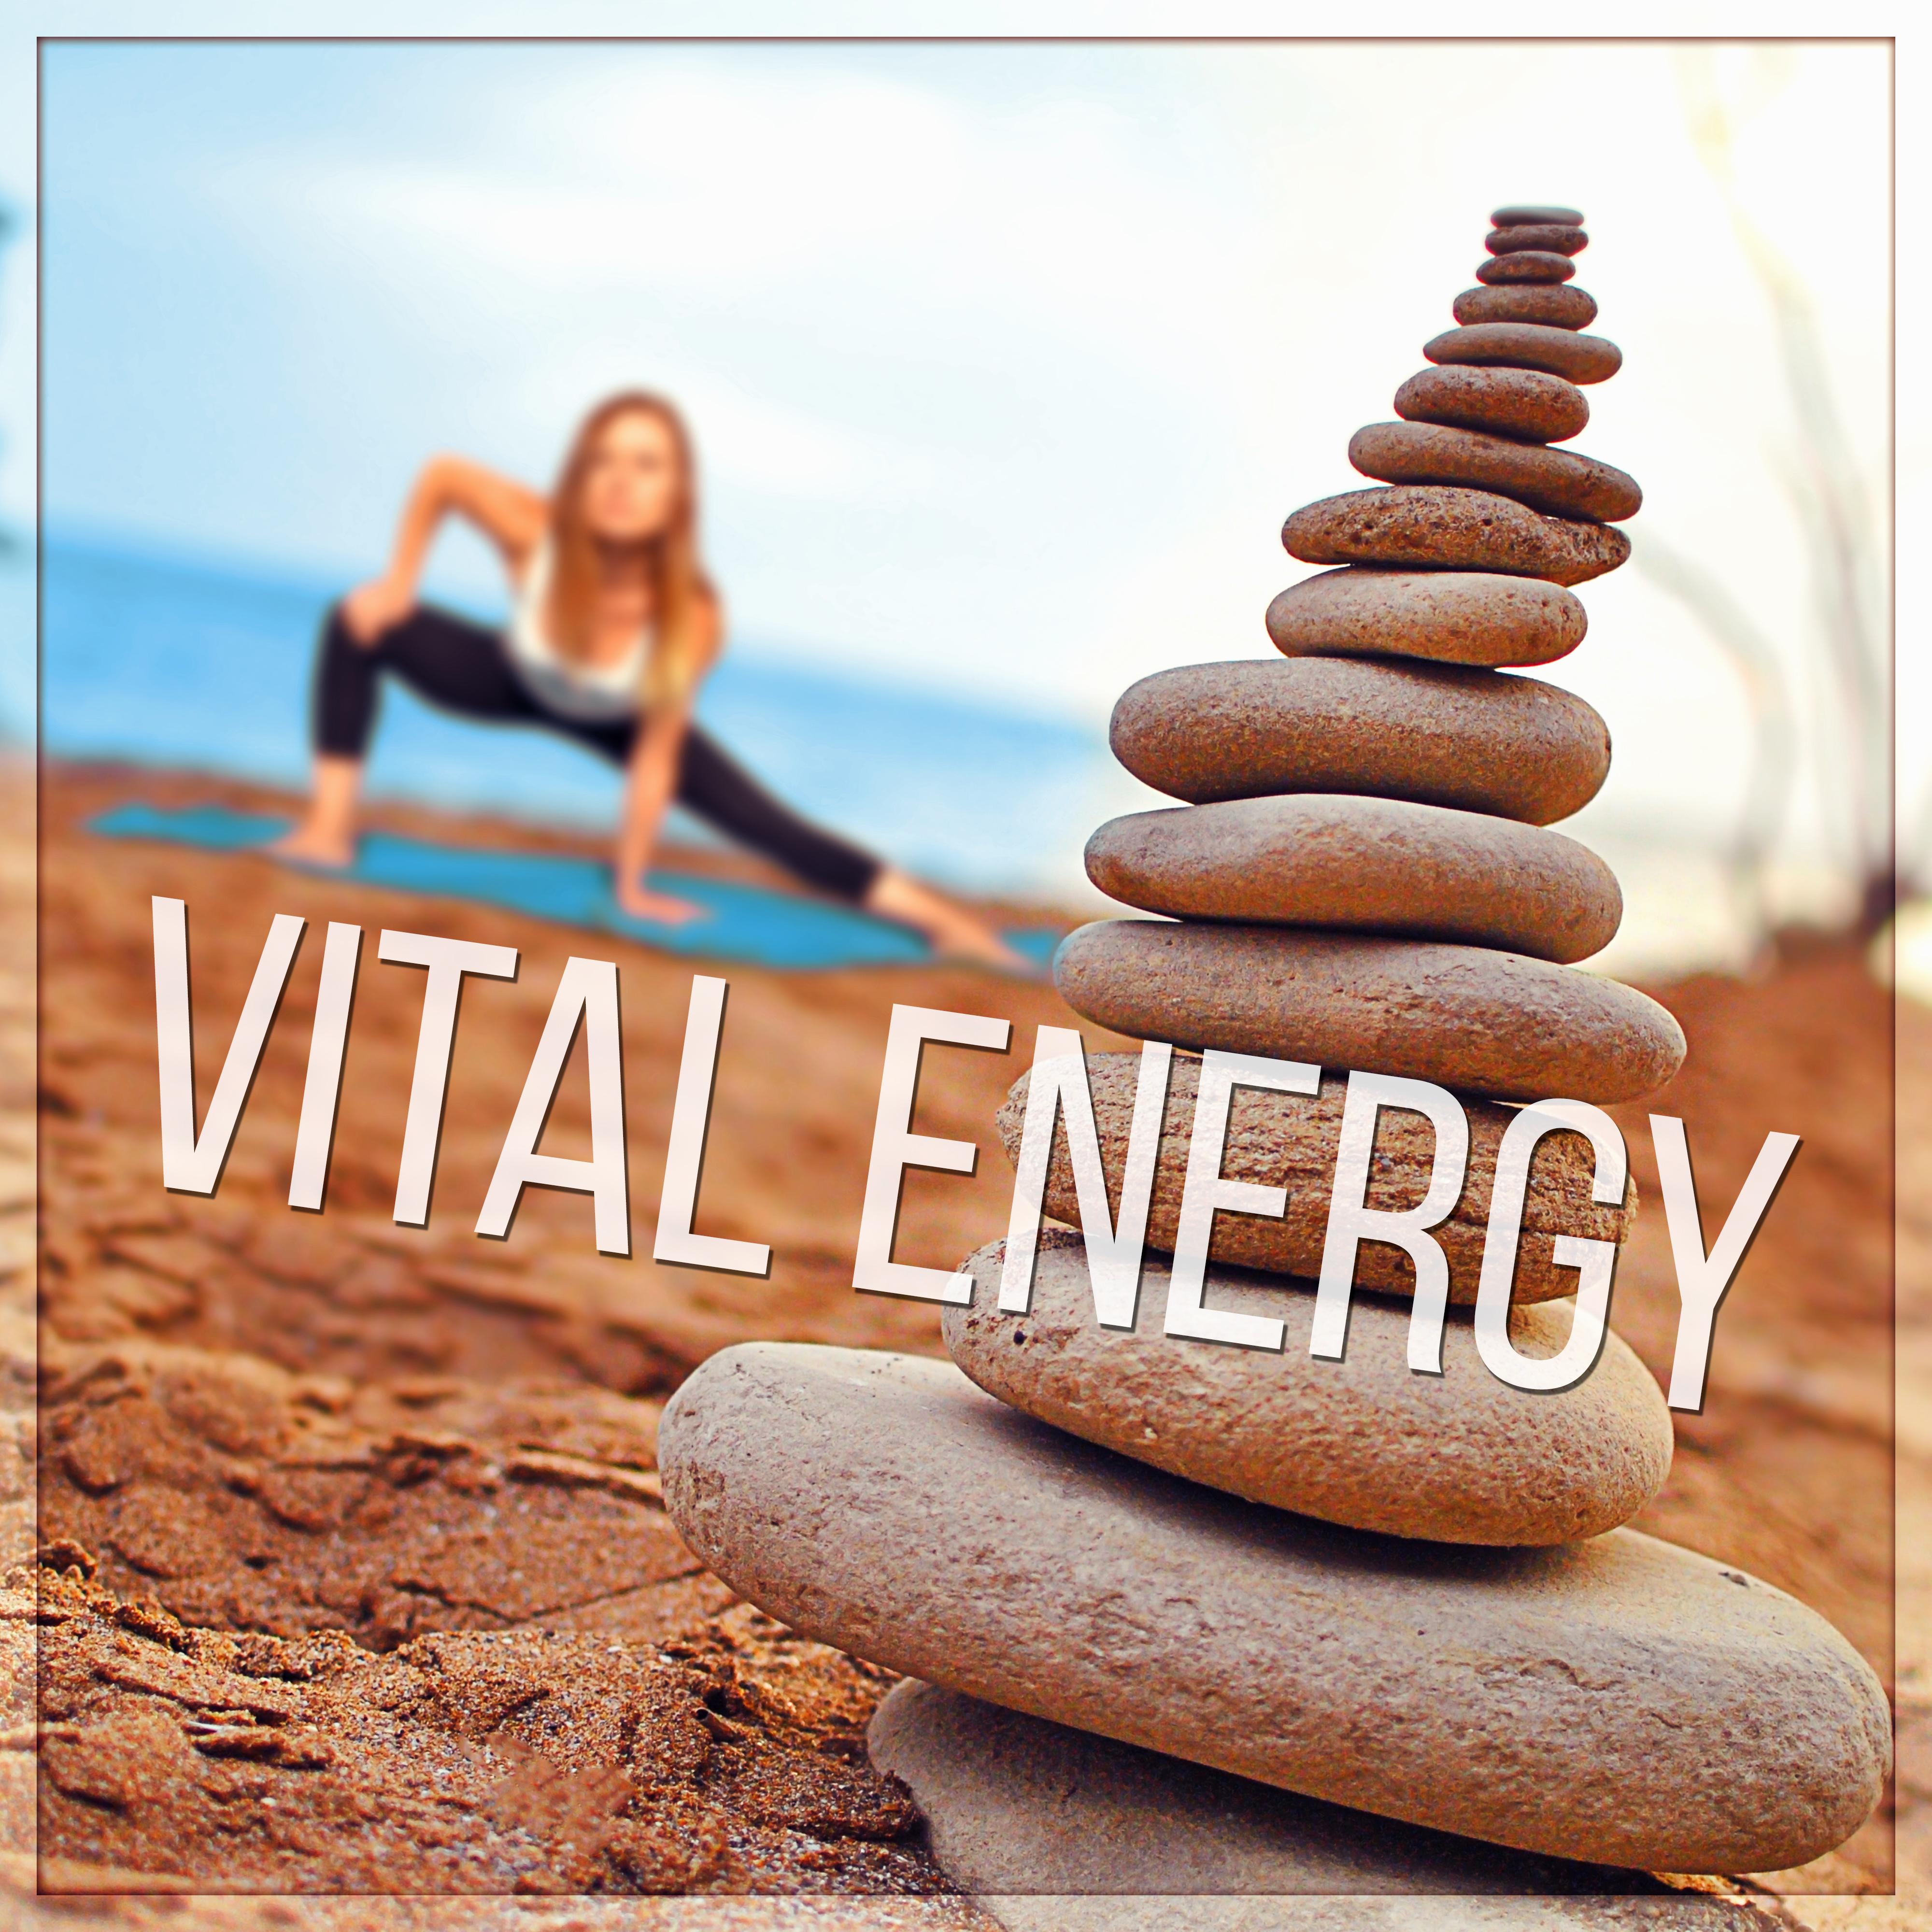 Vital Energy  Relaxing Songs for Mindfulness Meditation  Yoga Exercises, Guided Imagery Music, Asian Zen Spa and Massage, Natural White Noise, Sounds of Nature